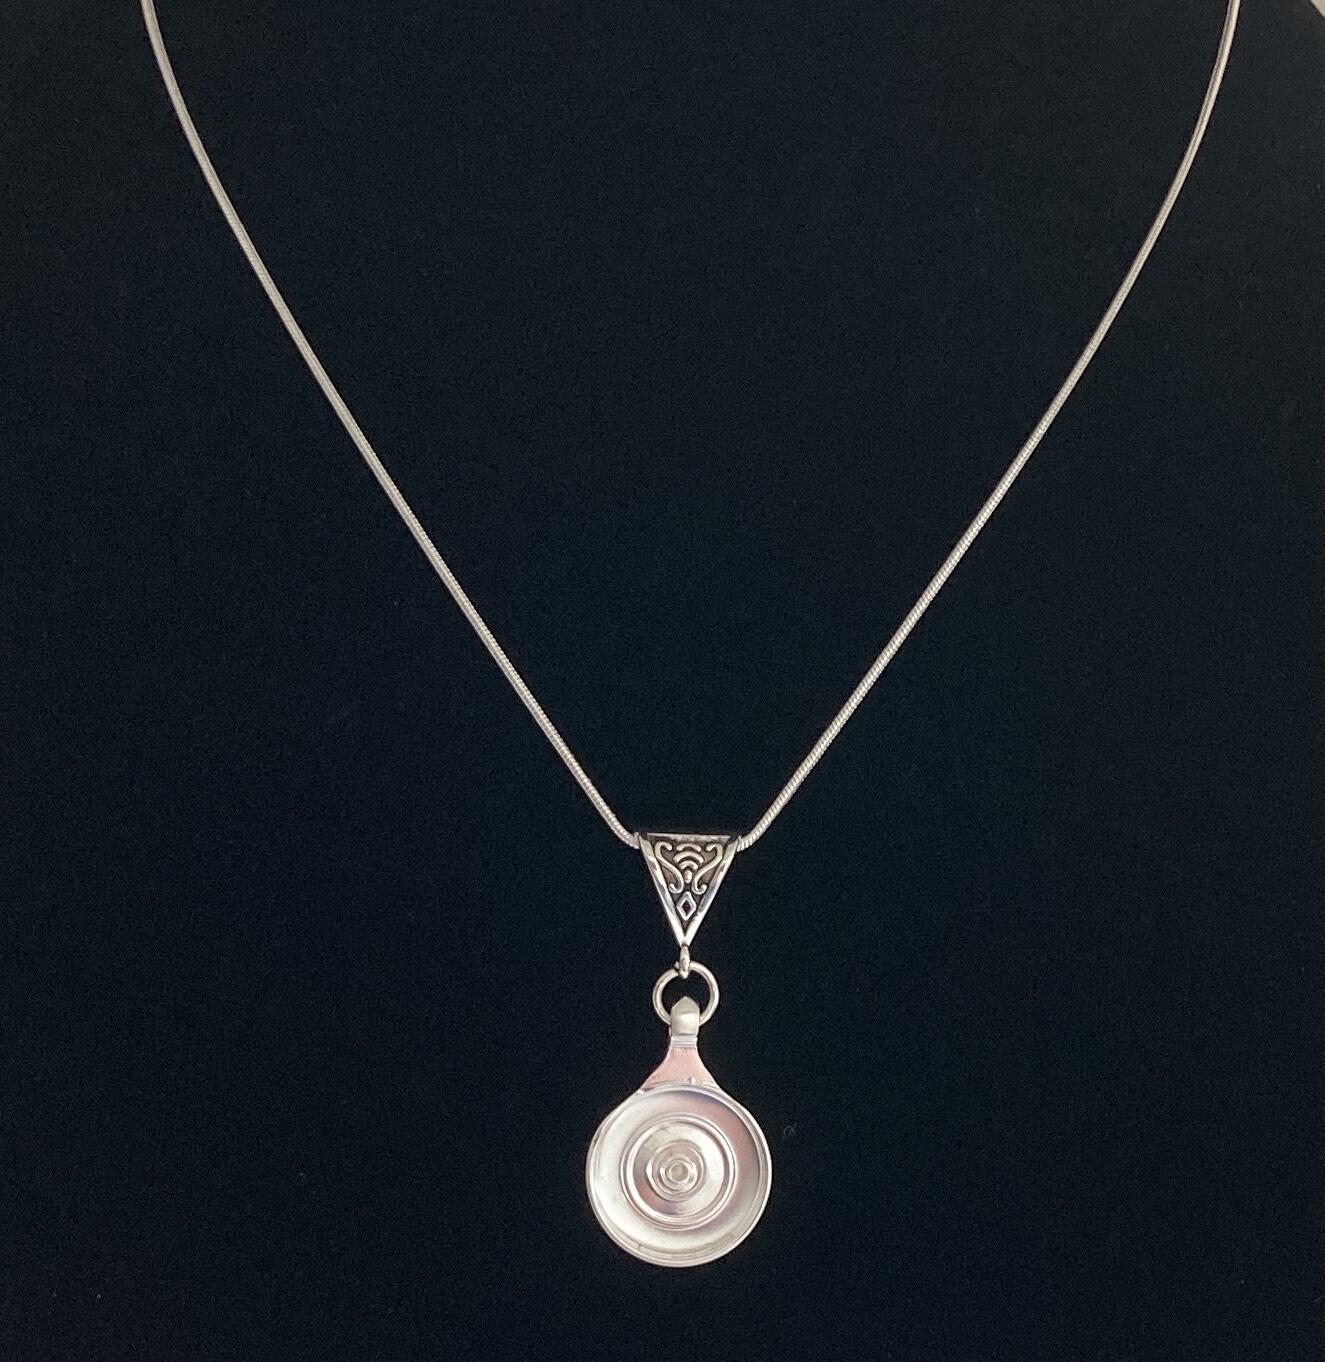 Plateau Silver Flute Key Forever Necklace.  Authentic flute key handcrafted for Flute Emporium.